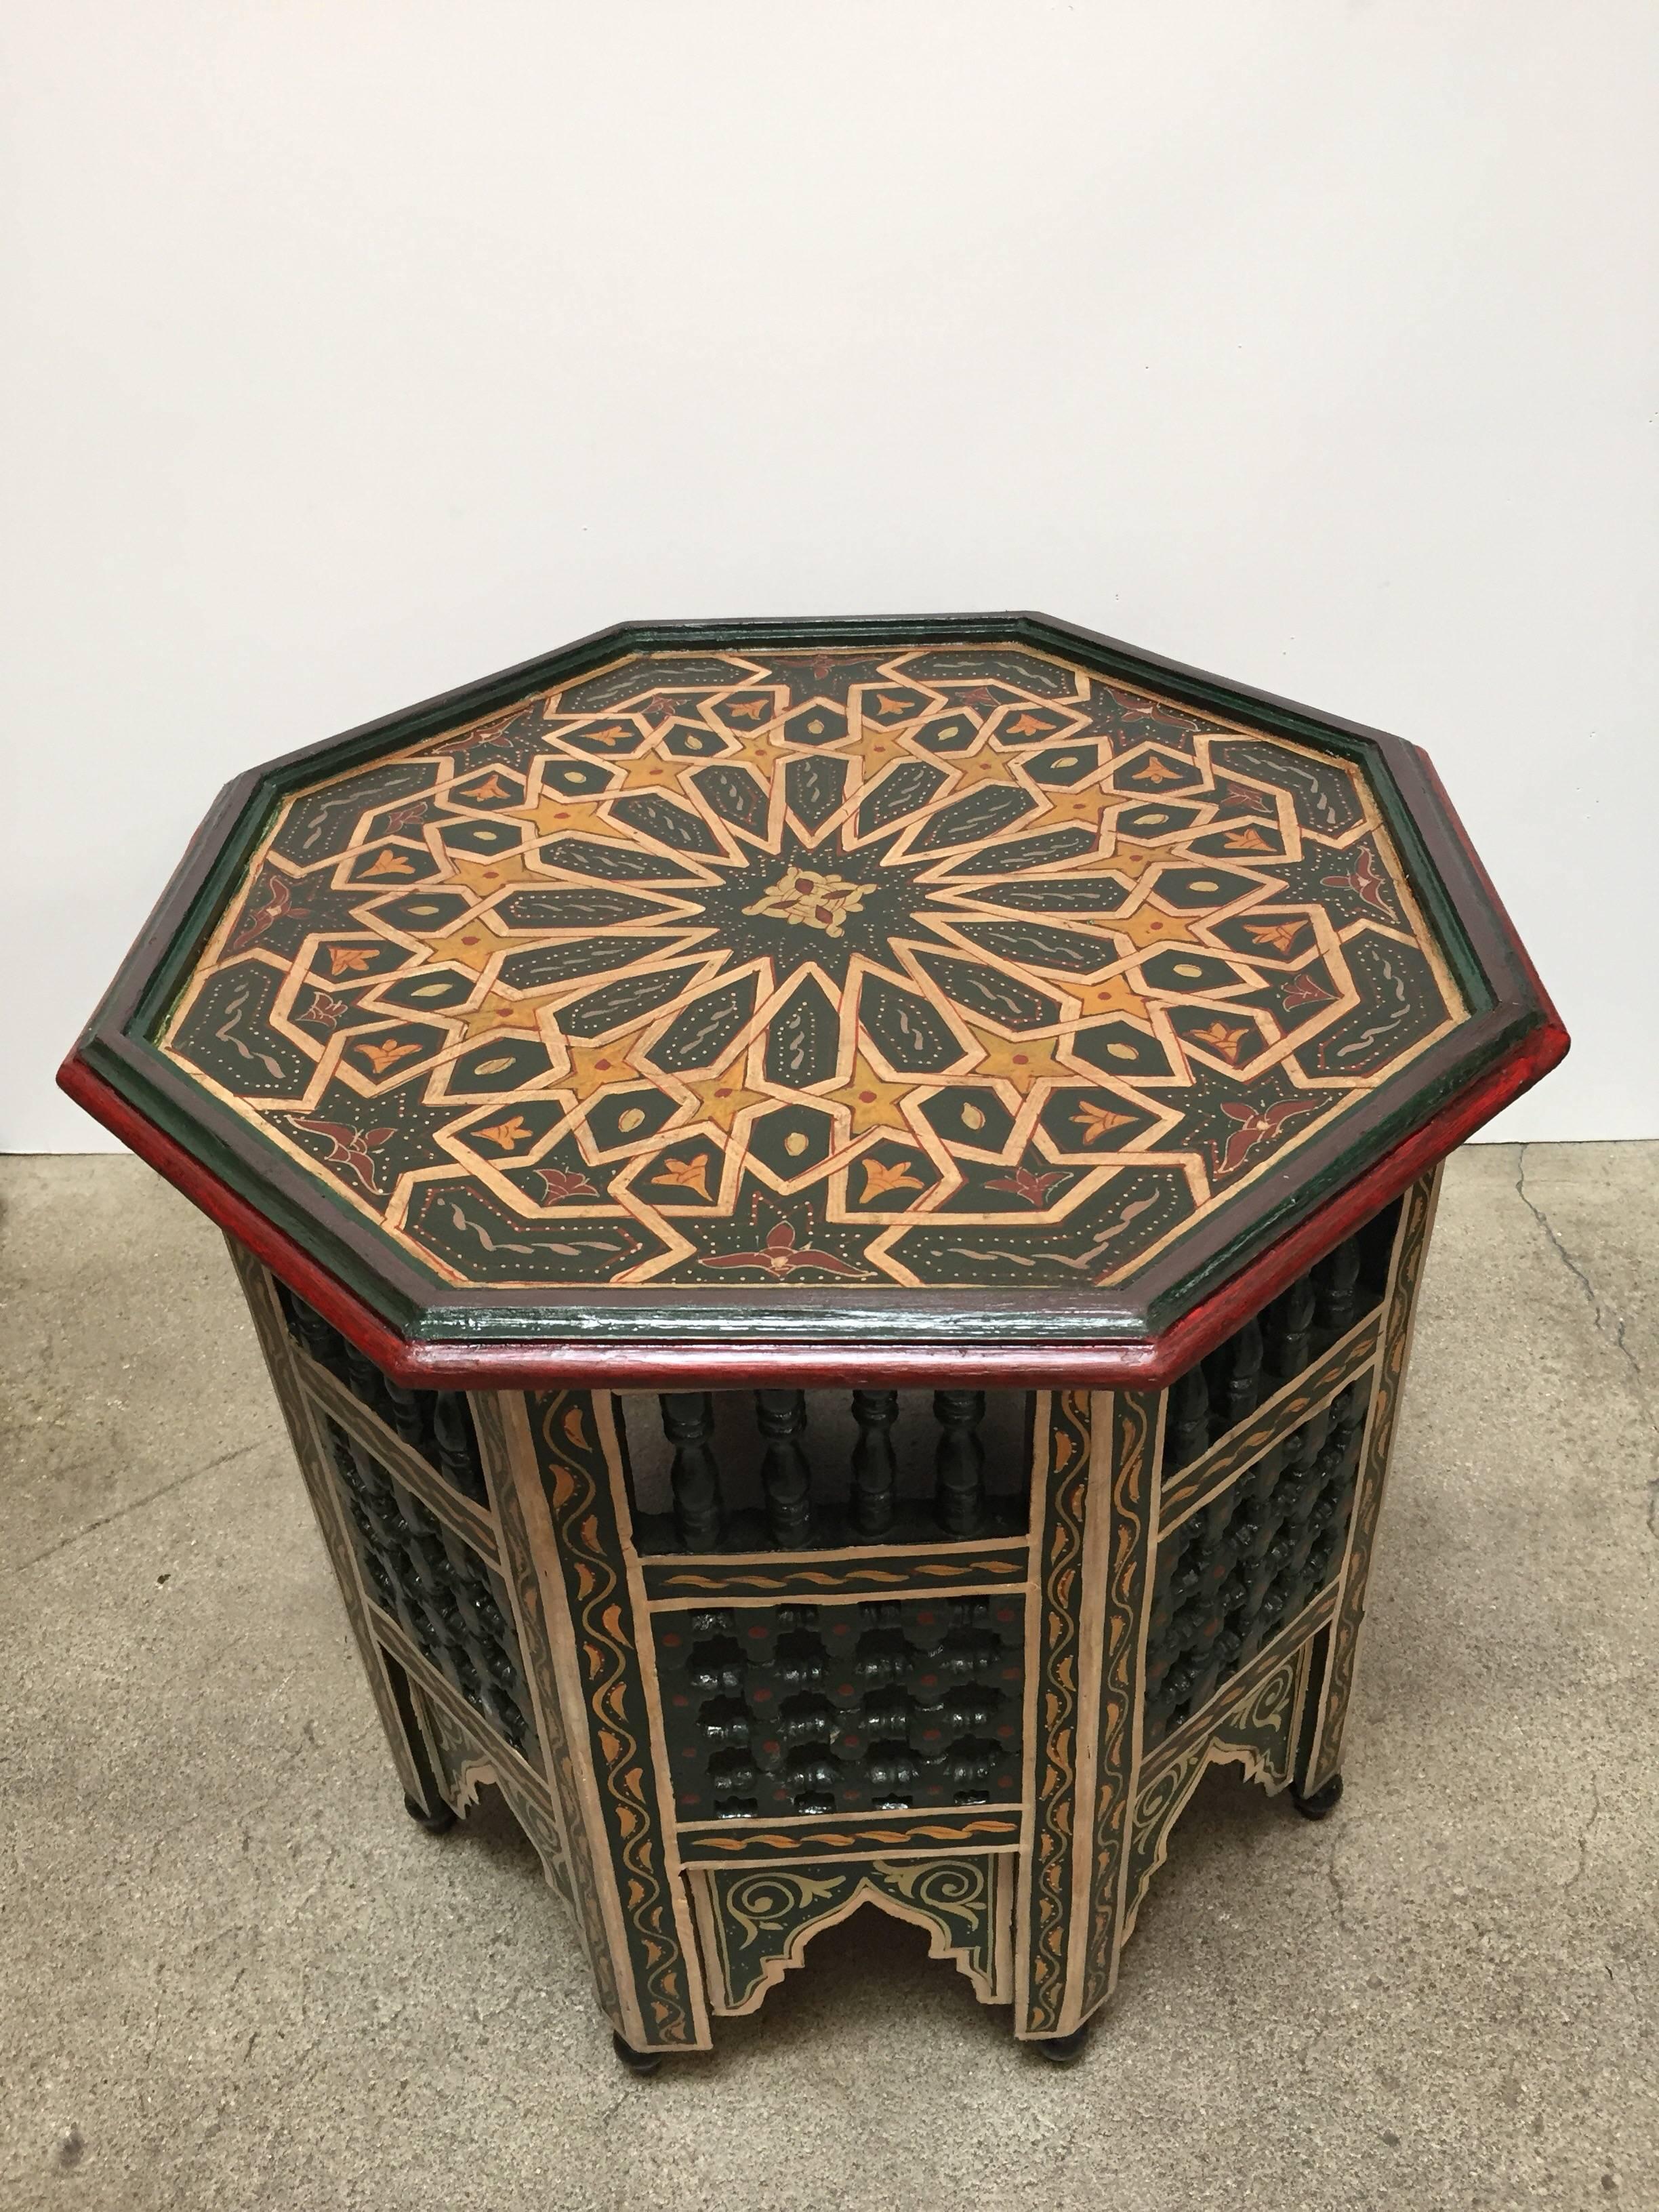 Moroccan colorful hand-painted dark green side table with Moorish design and open fret mousharabie work on sides.
Dark green background with multicolored floral top and geometric designs.
Very fine wood artwork on an octagonal shape with Moorish